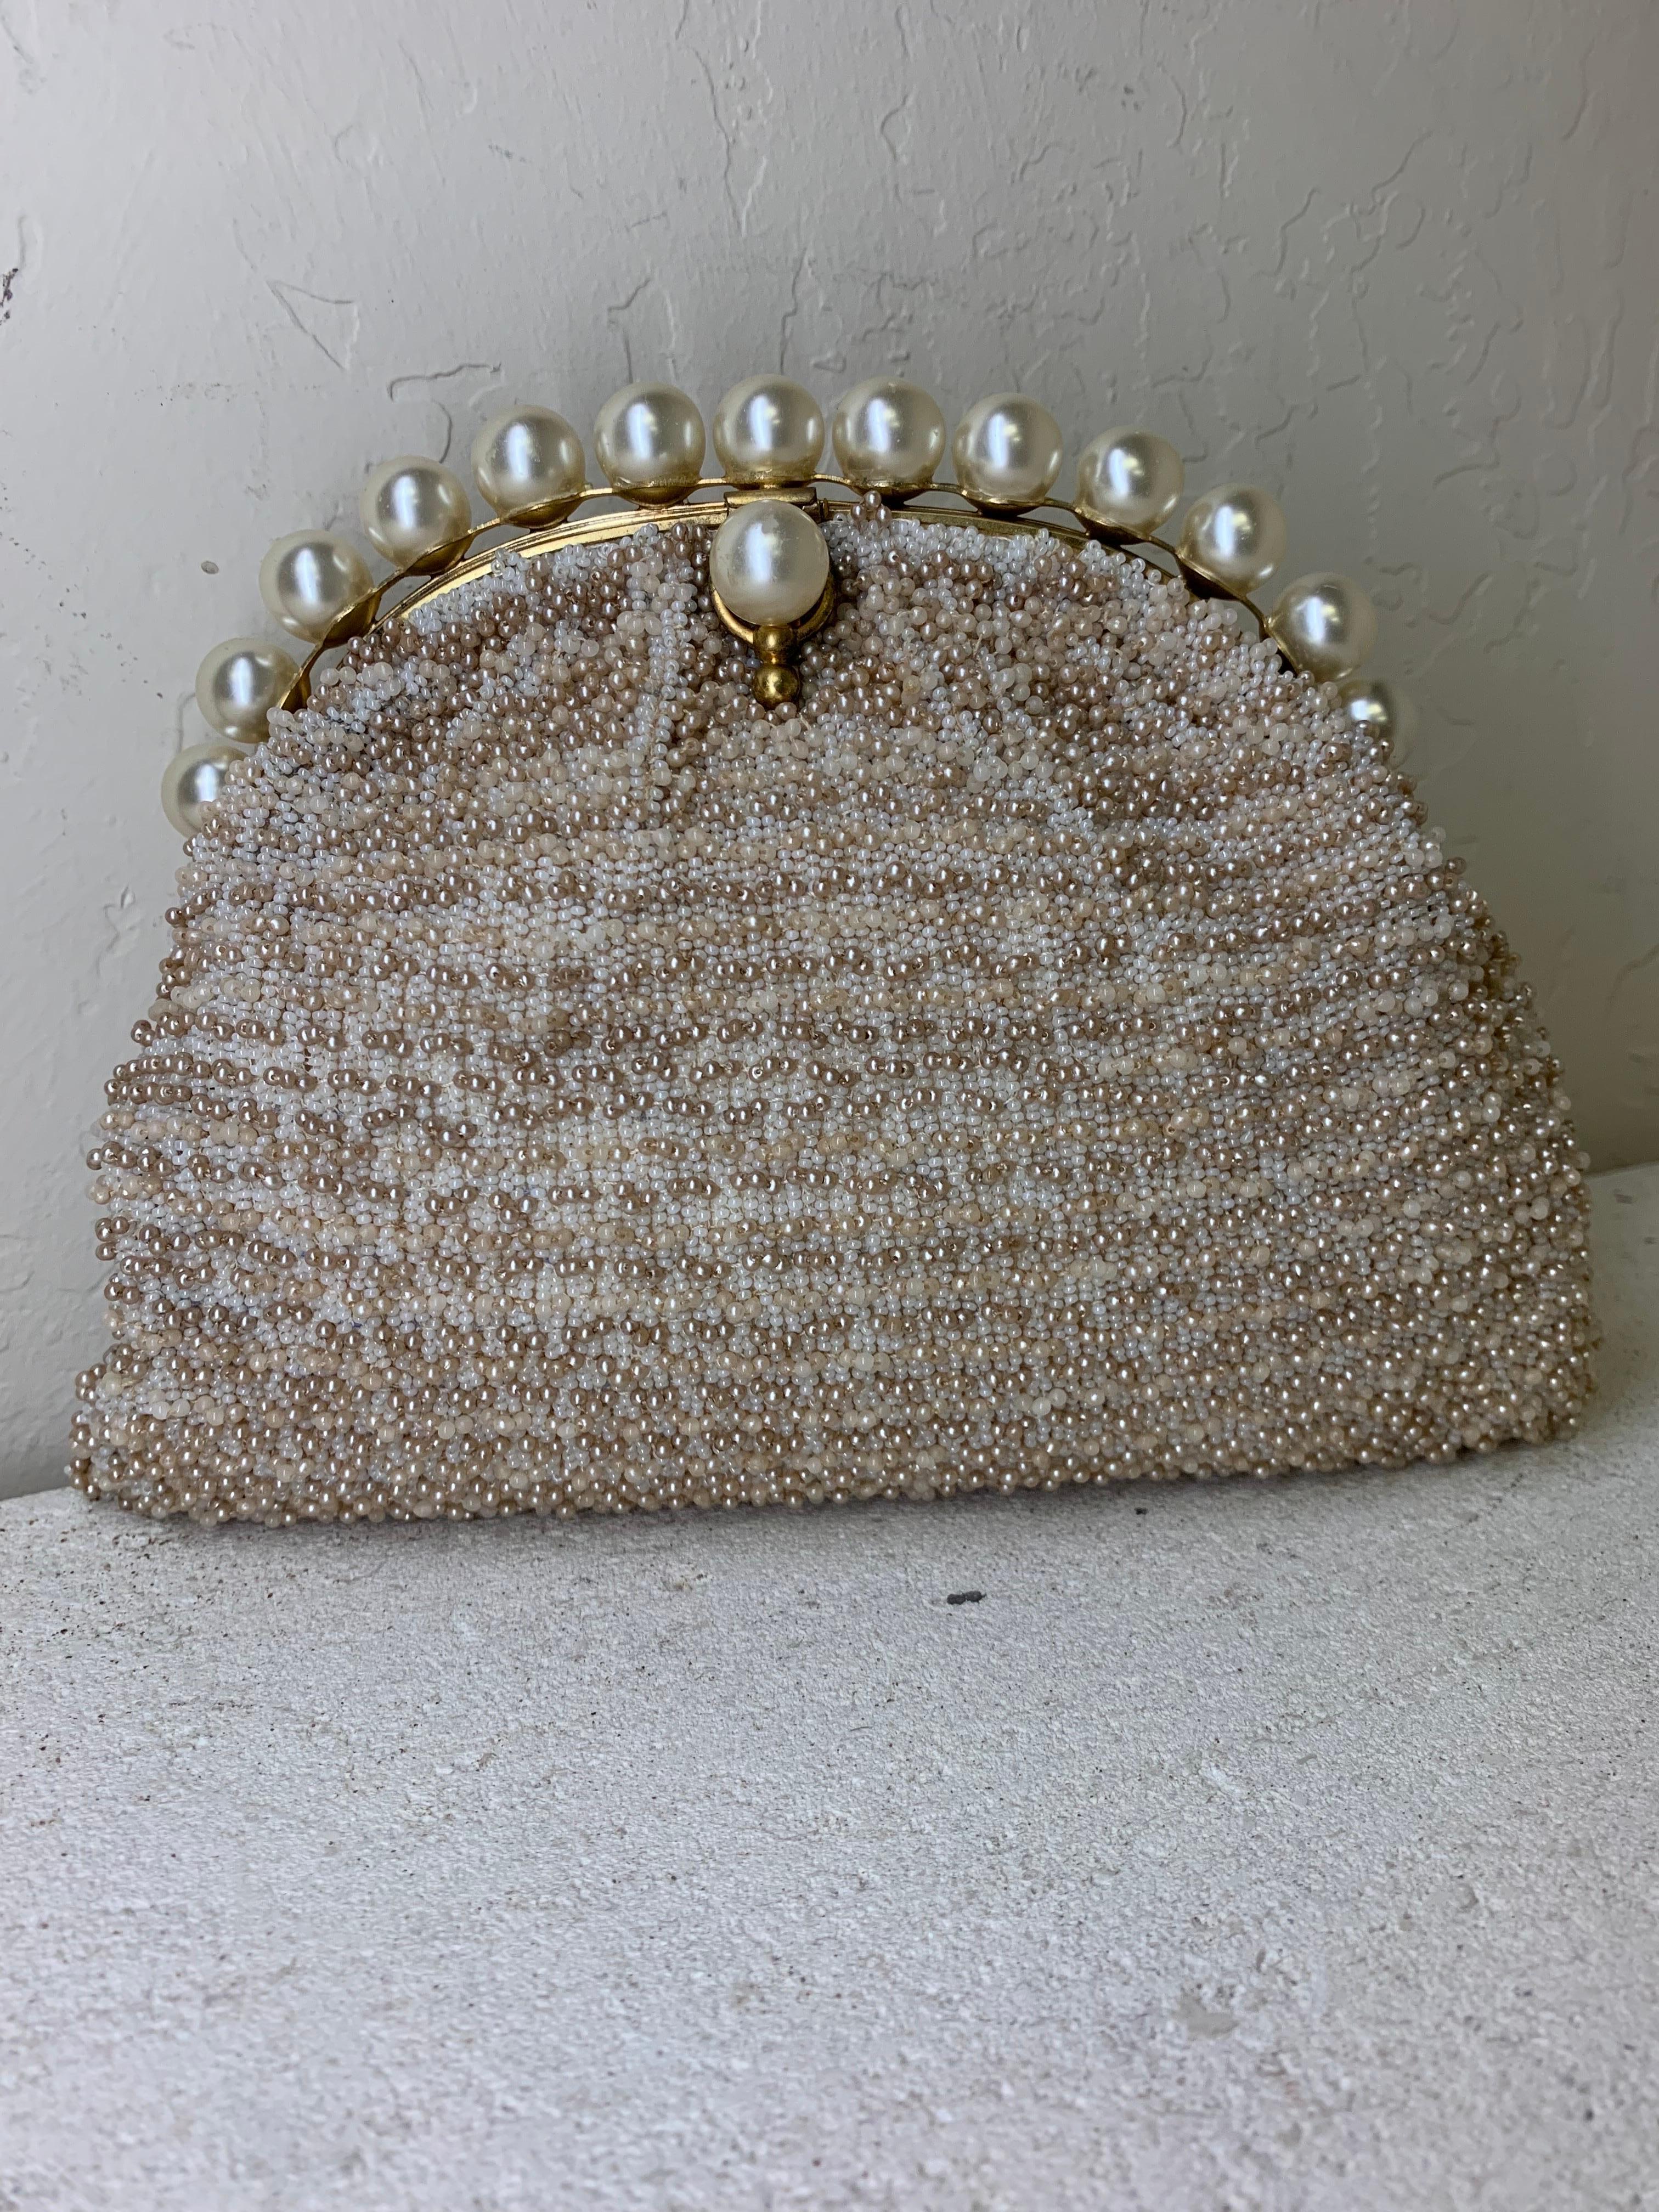 1950s Koret Champagne Seed Pearl Encrusted Evening Clutch w Pearl Studded Frame: Pristine condition with satin lining, and original box. Medium size purse will accommodate cell phone. 